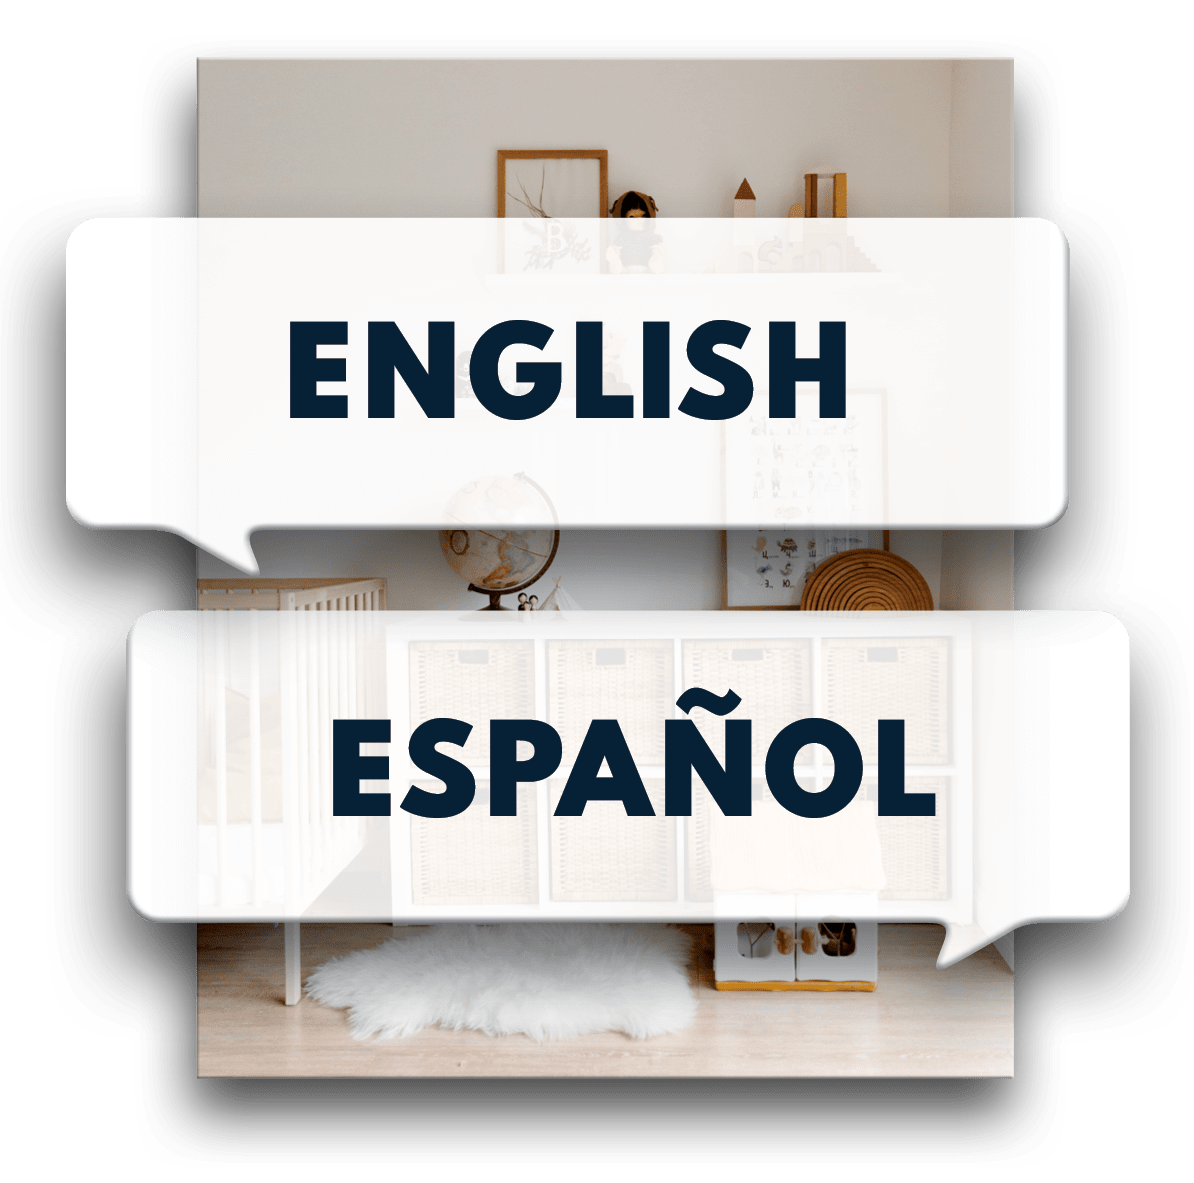 Content in English, Spanish or both